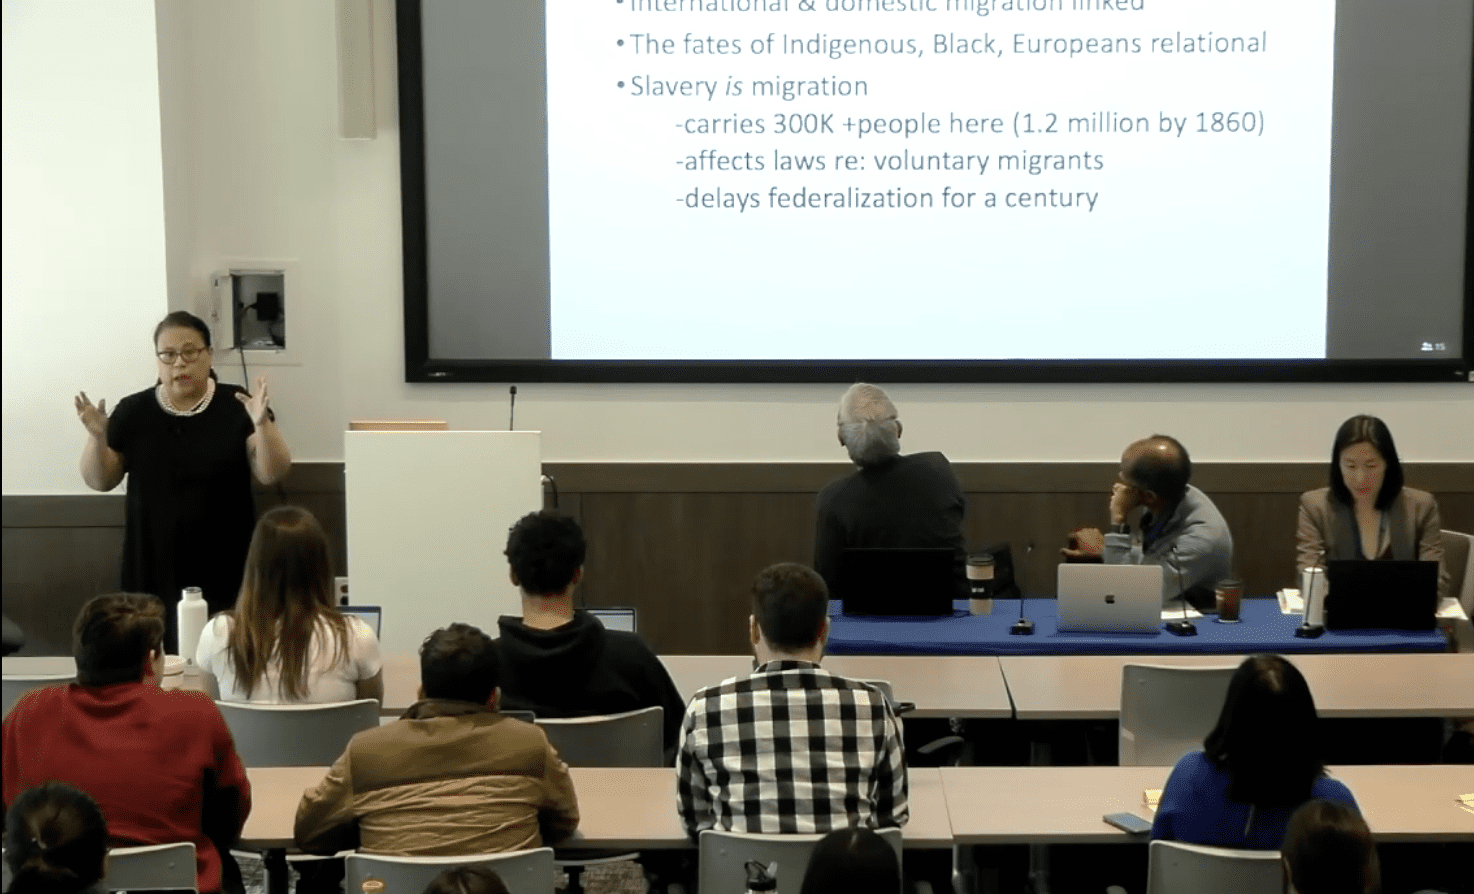 Anna Law, Associate Professor and Herb Kurz Chair in Constitutional Rights at CUNY presents “Race Reconstruction, and Black Citizenship” with Faculty discussants Richard Boswell and Jack Chin.